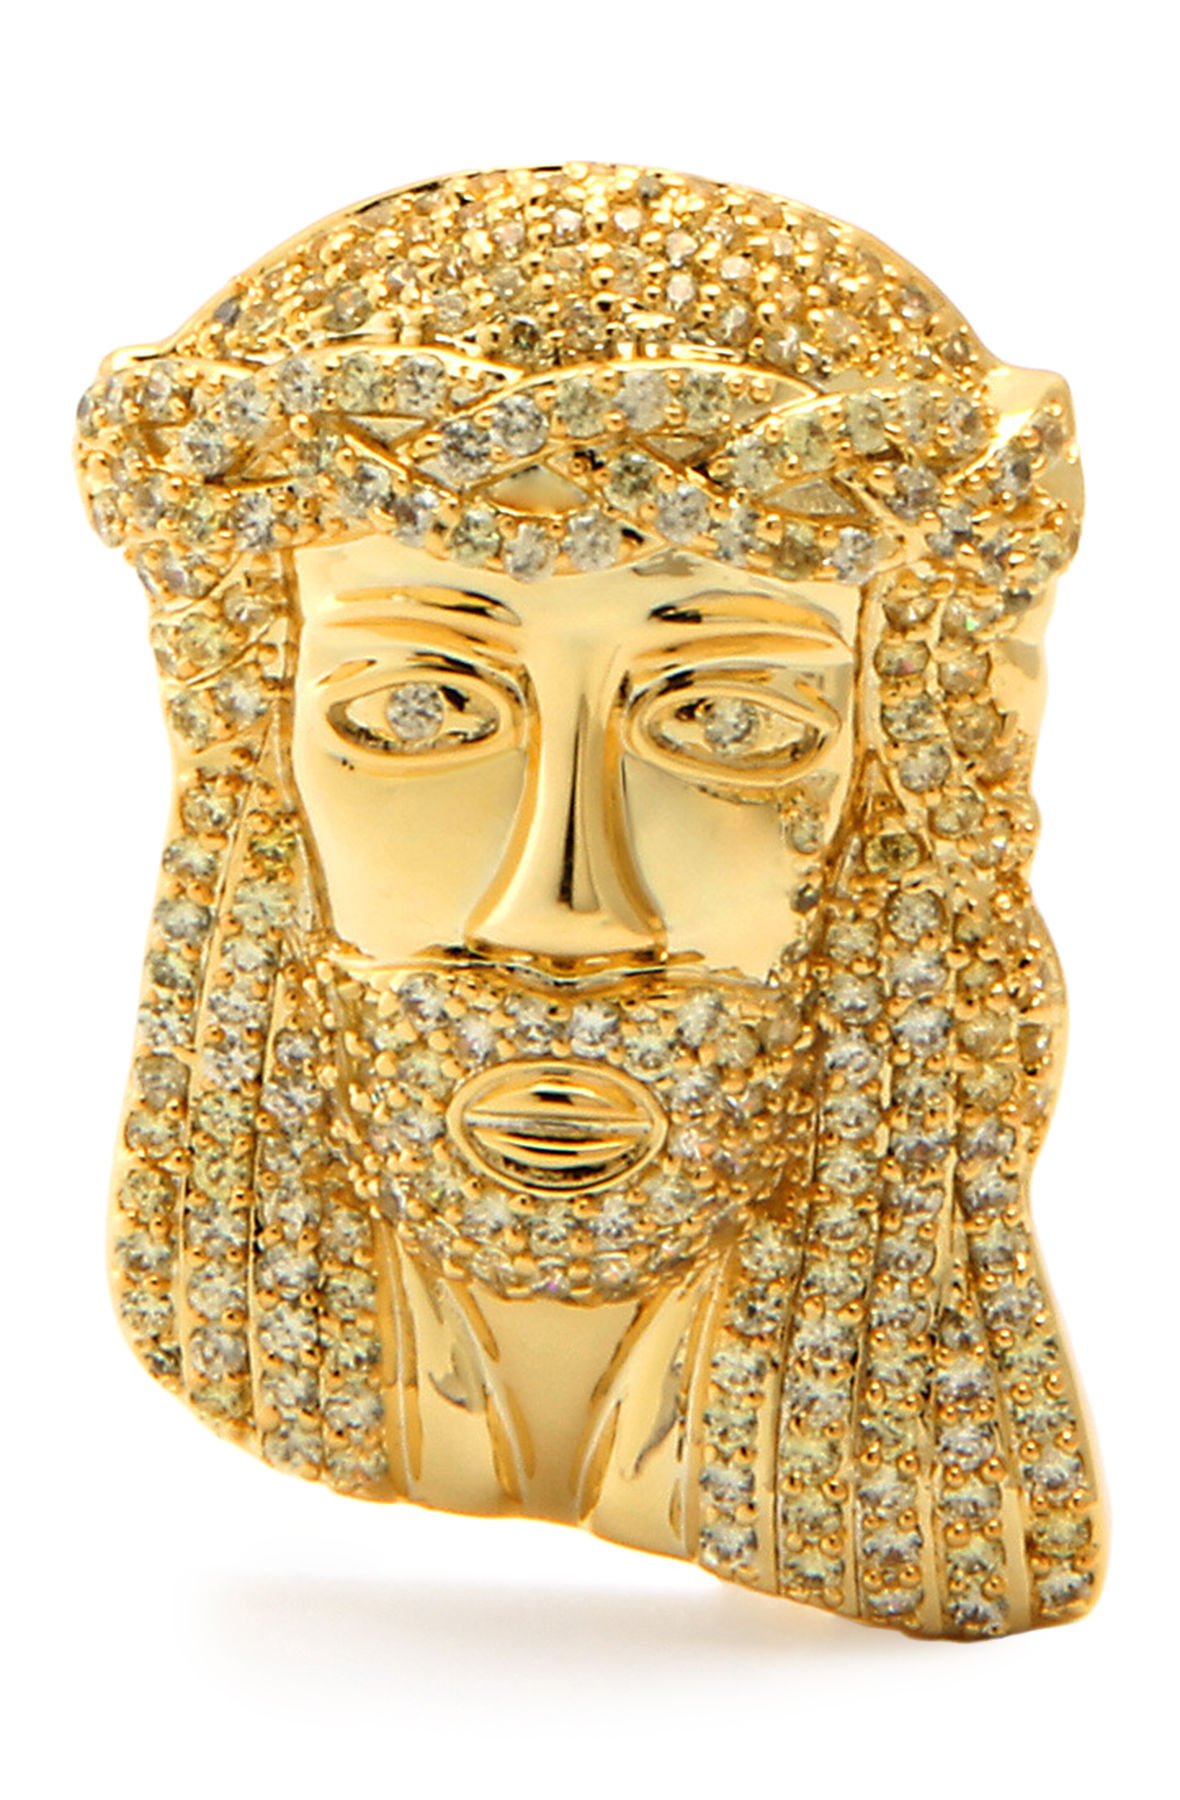 The King Ice 14k Gold Cz Jesus Pin In Gold